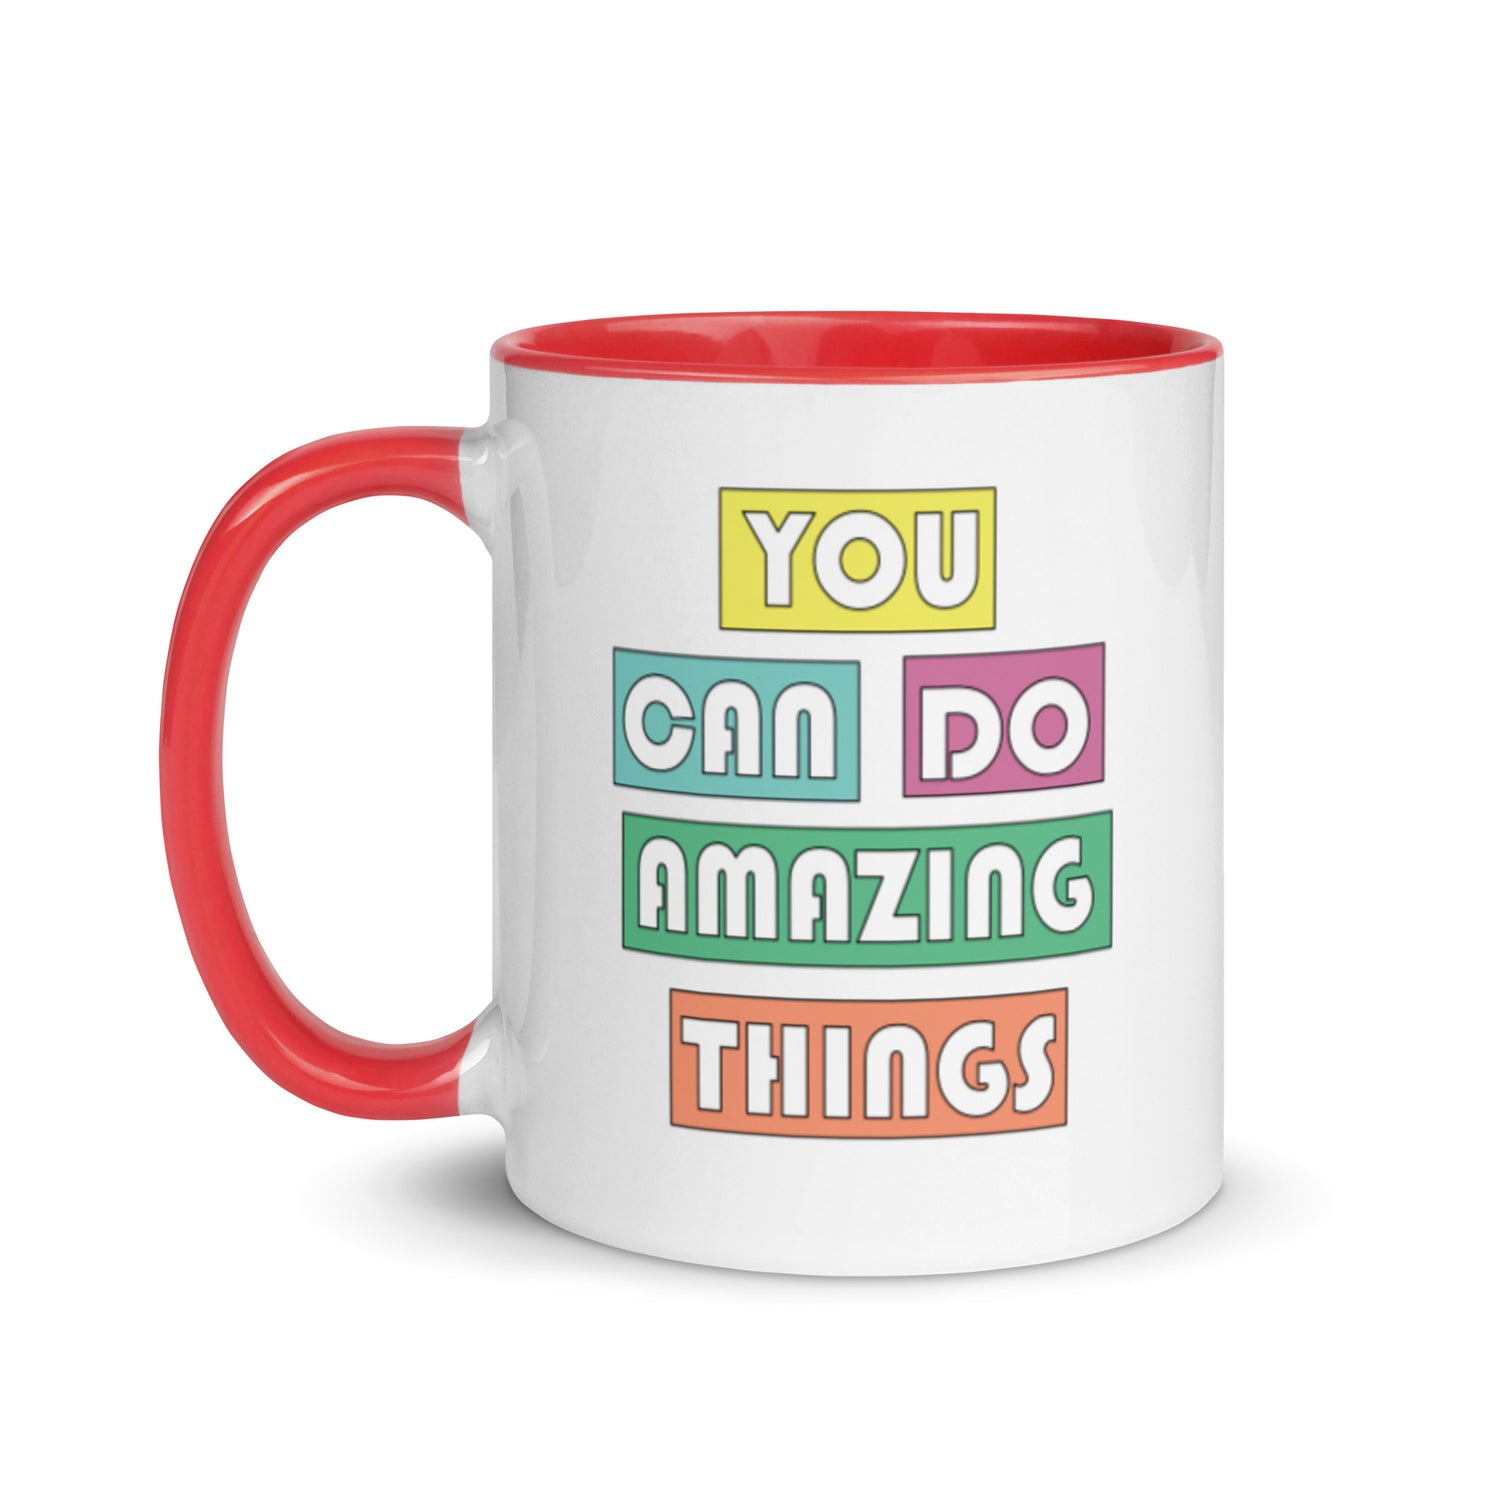 you can do amazing things mug with red interior